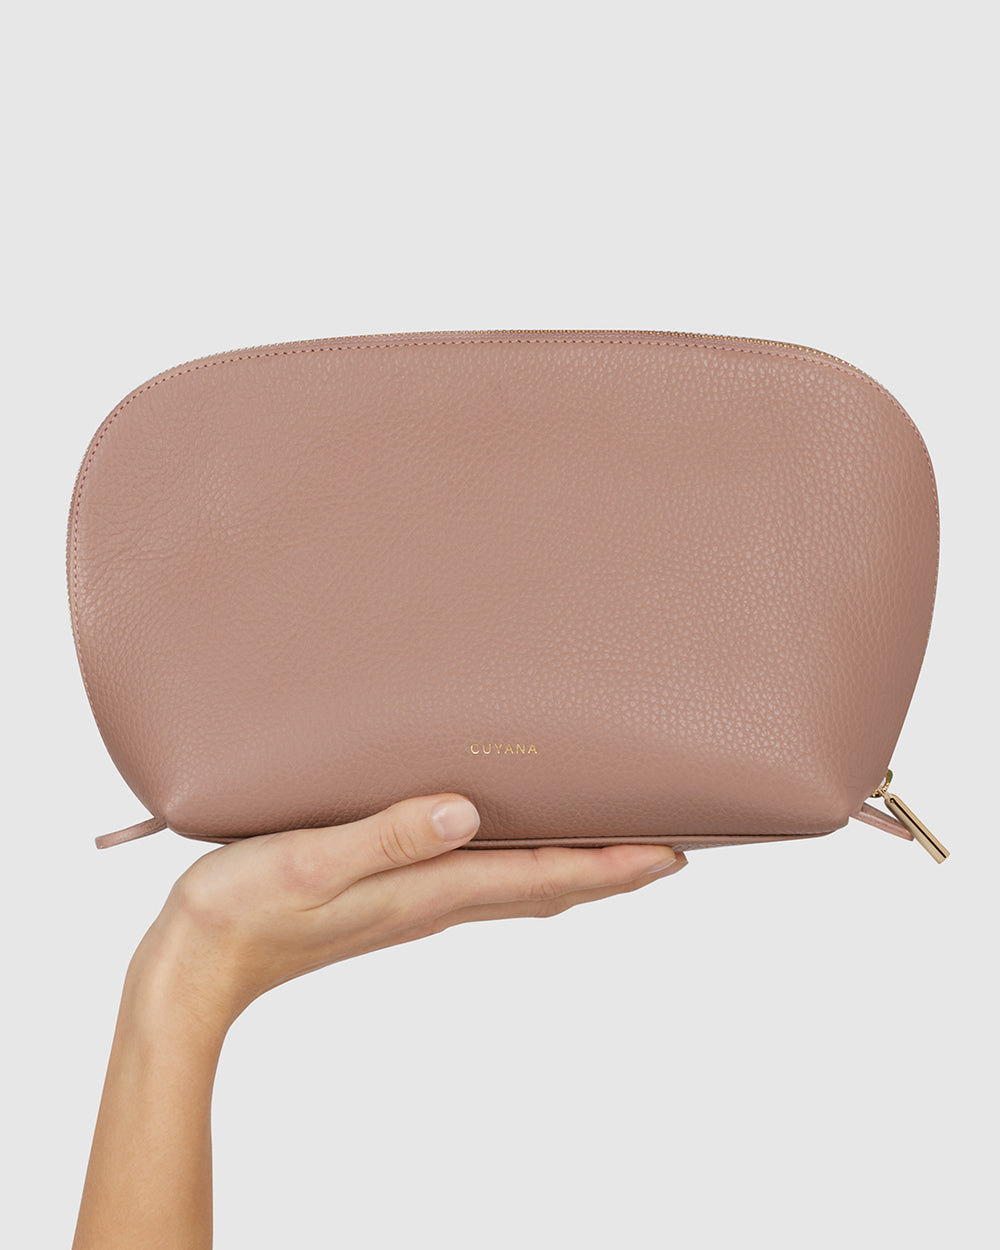 Hand holding a textured clutch with a zipper closure.